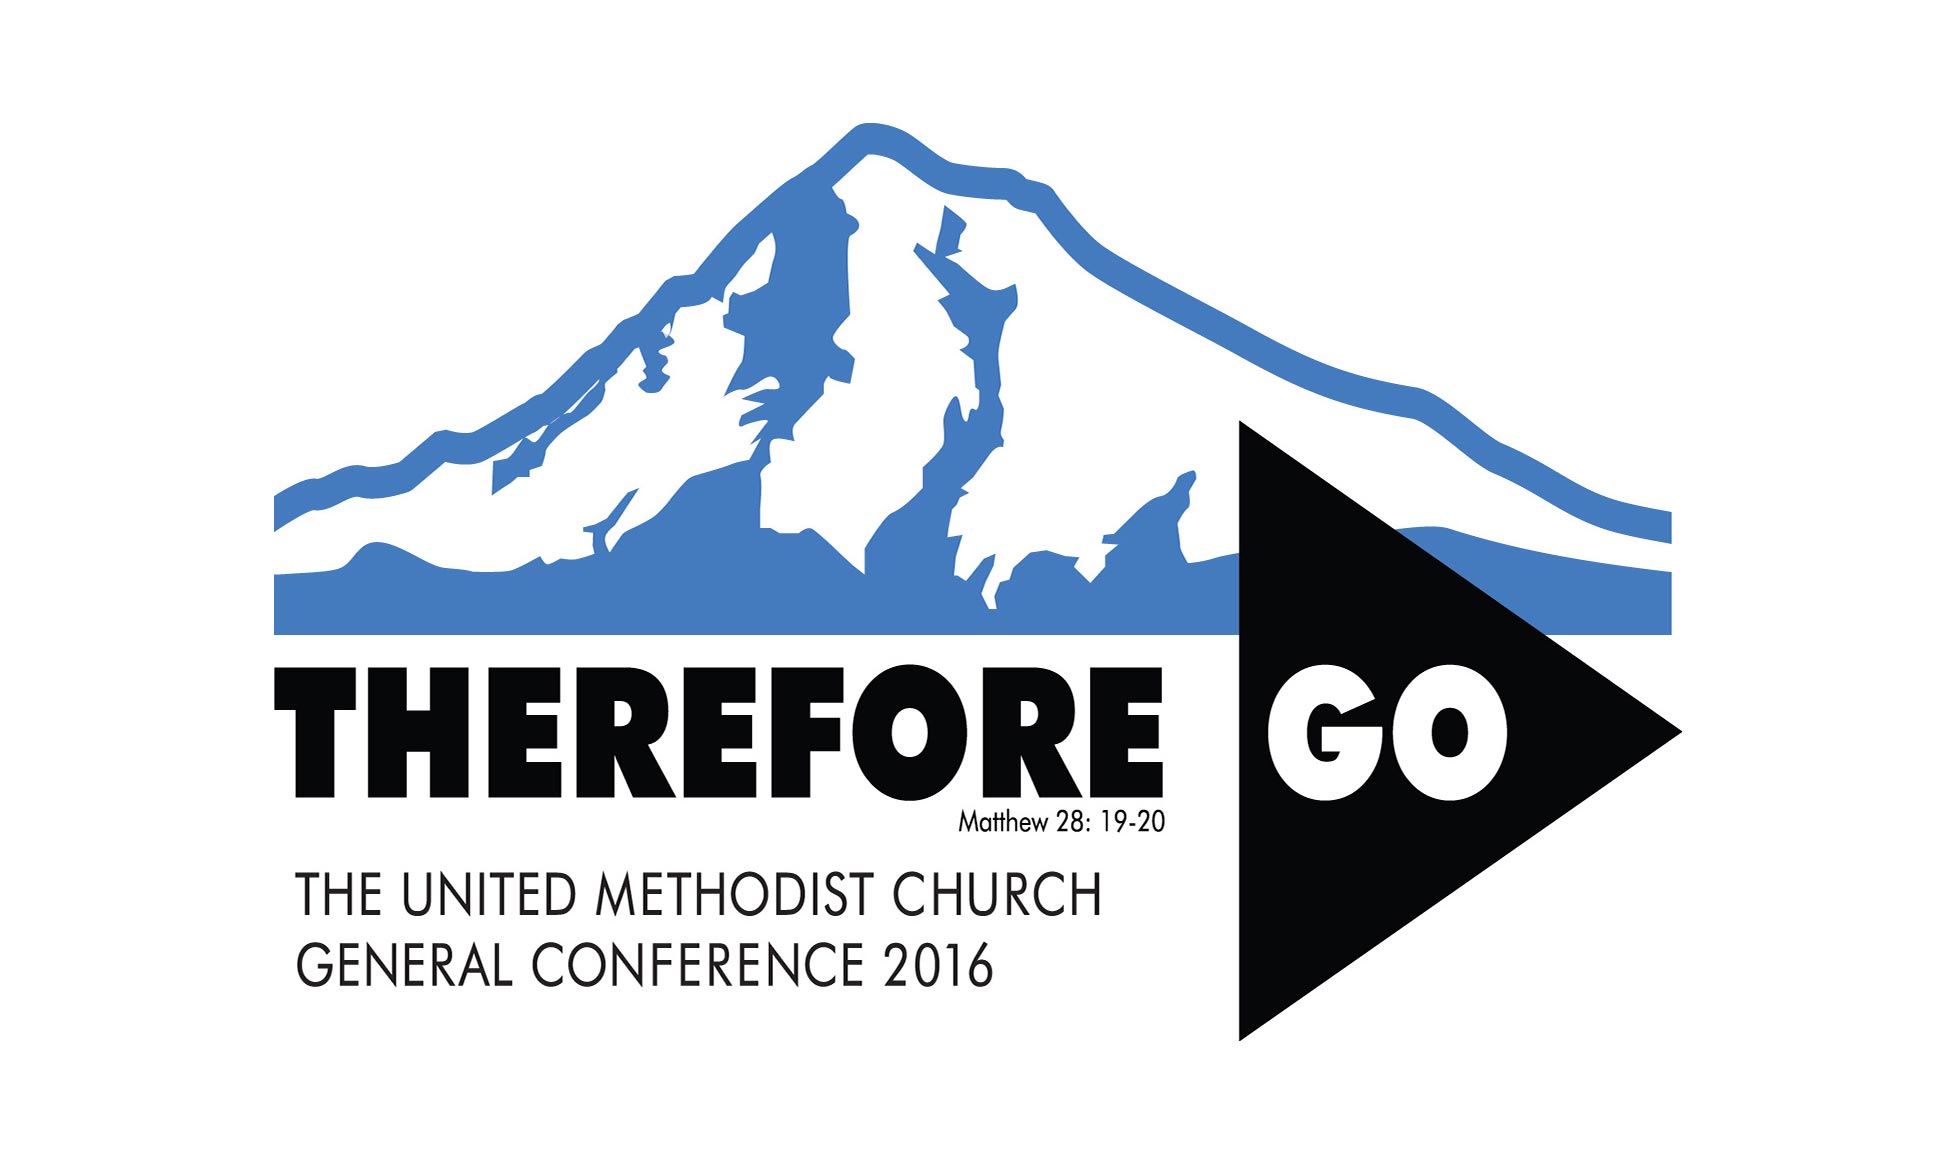 Reflections on the United Methodist General Conference